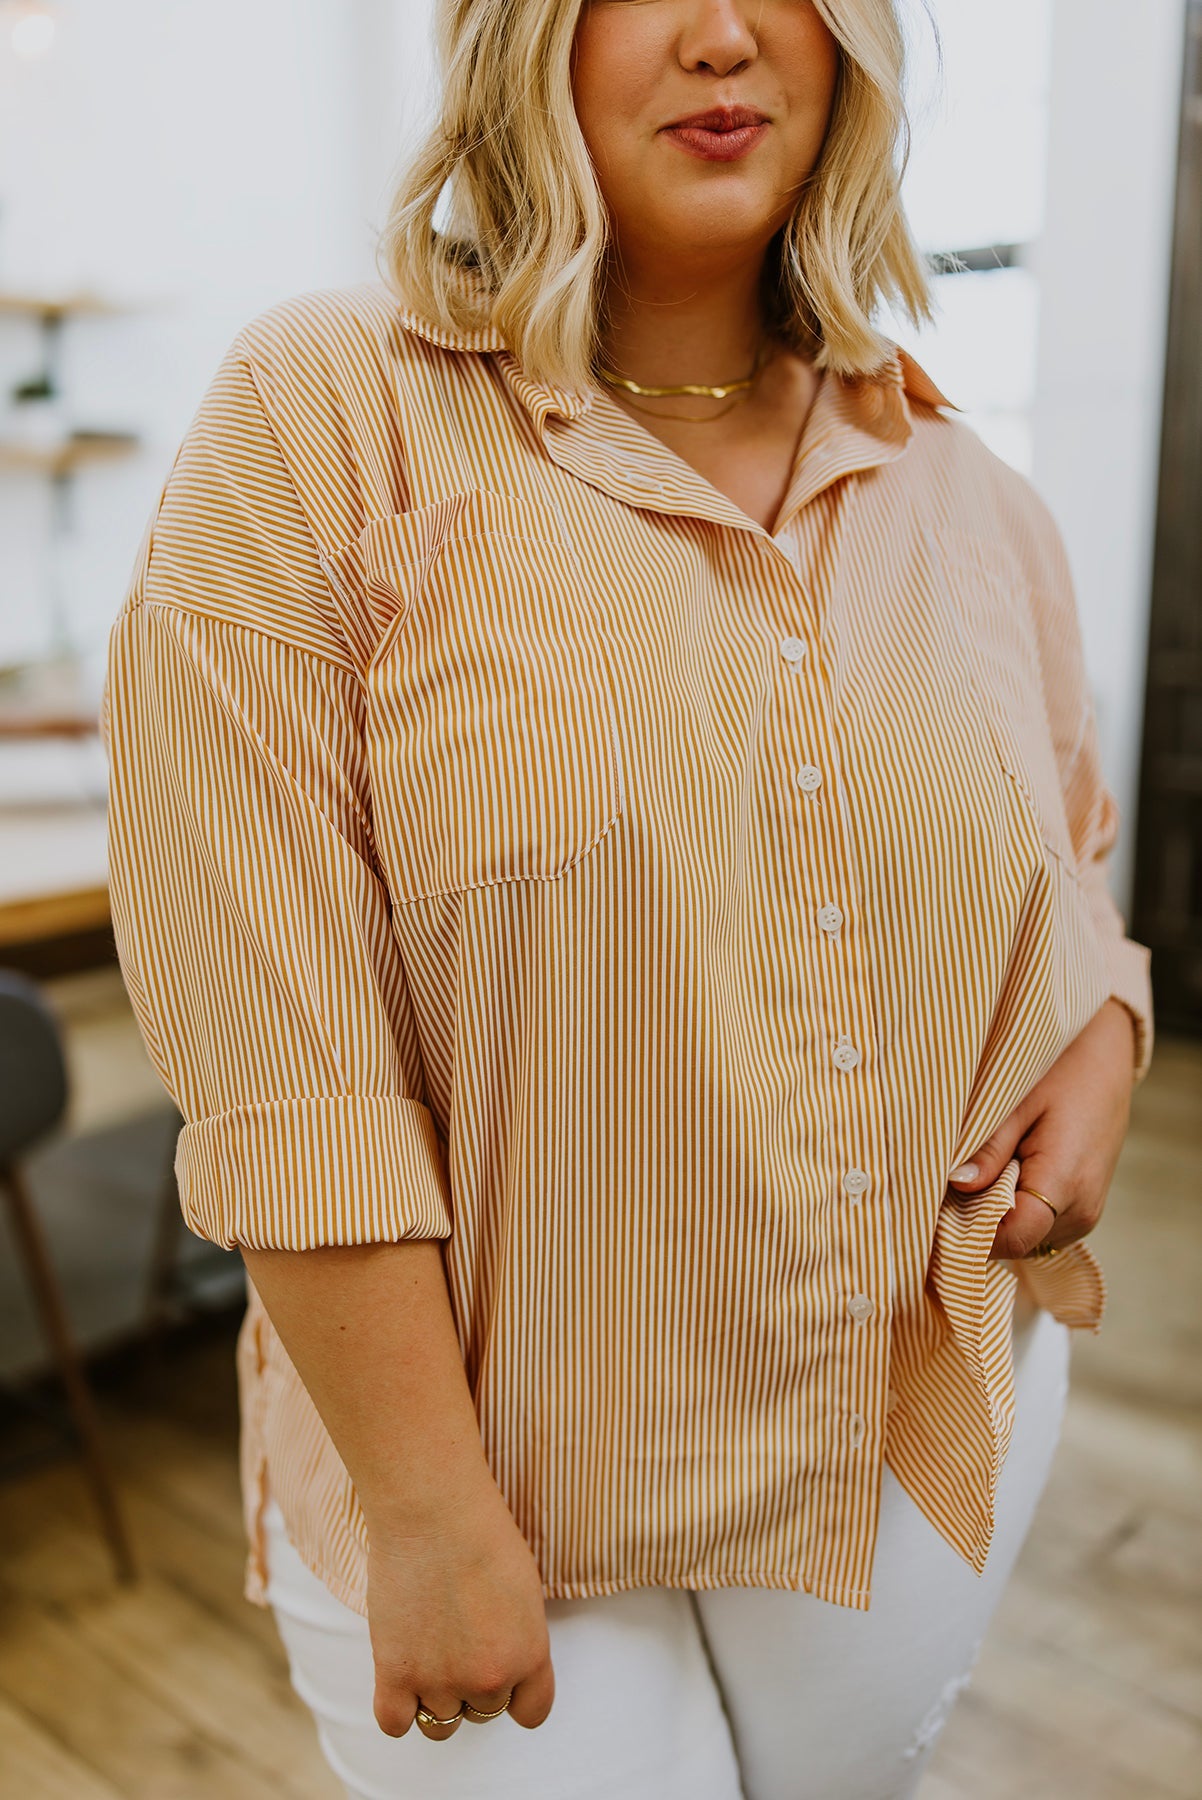 Zenana Easy On The Eyes Striped Button Up